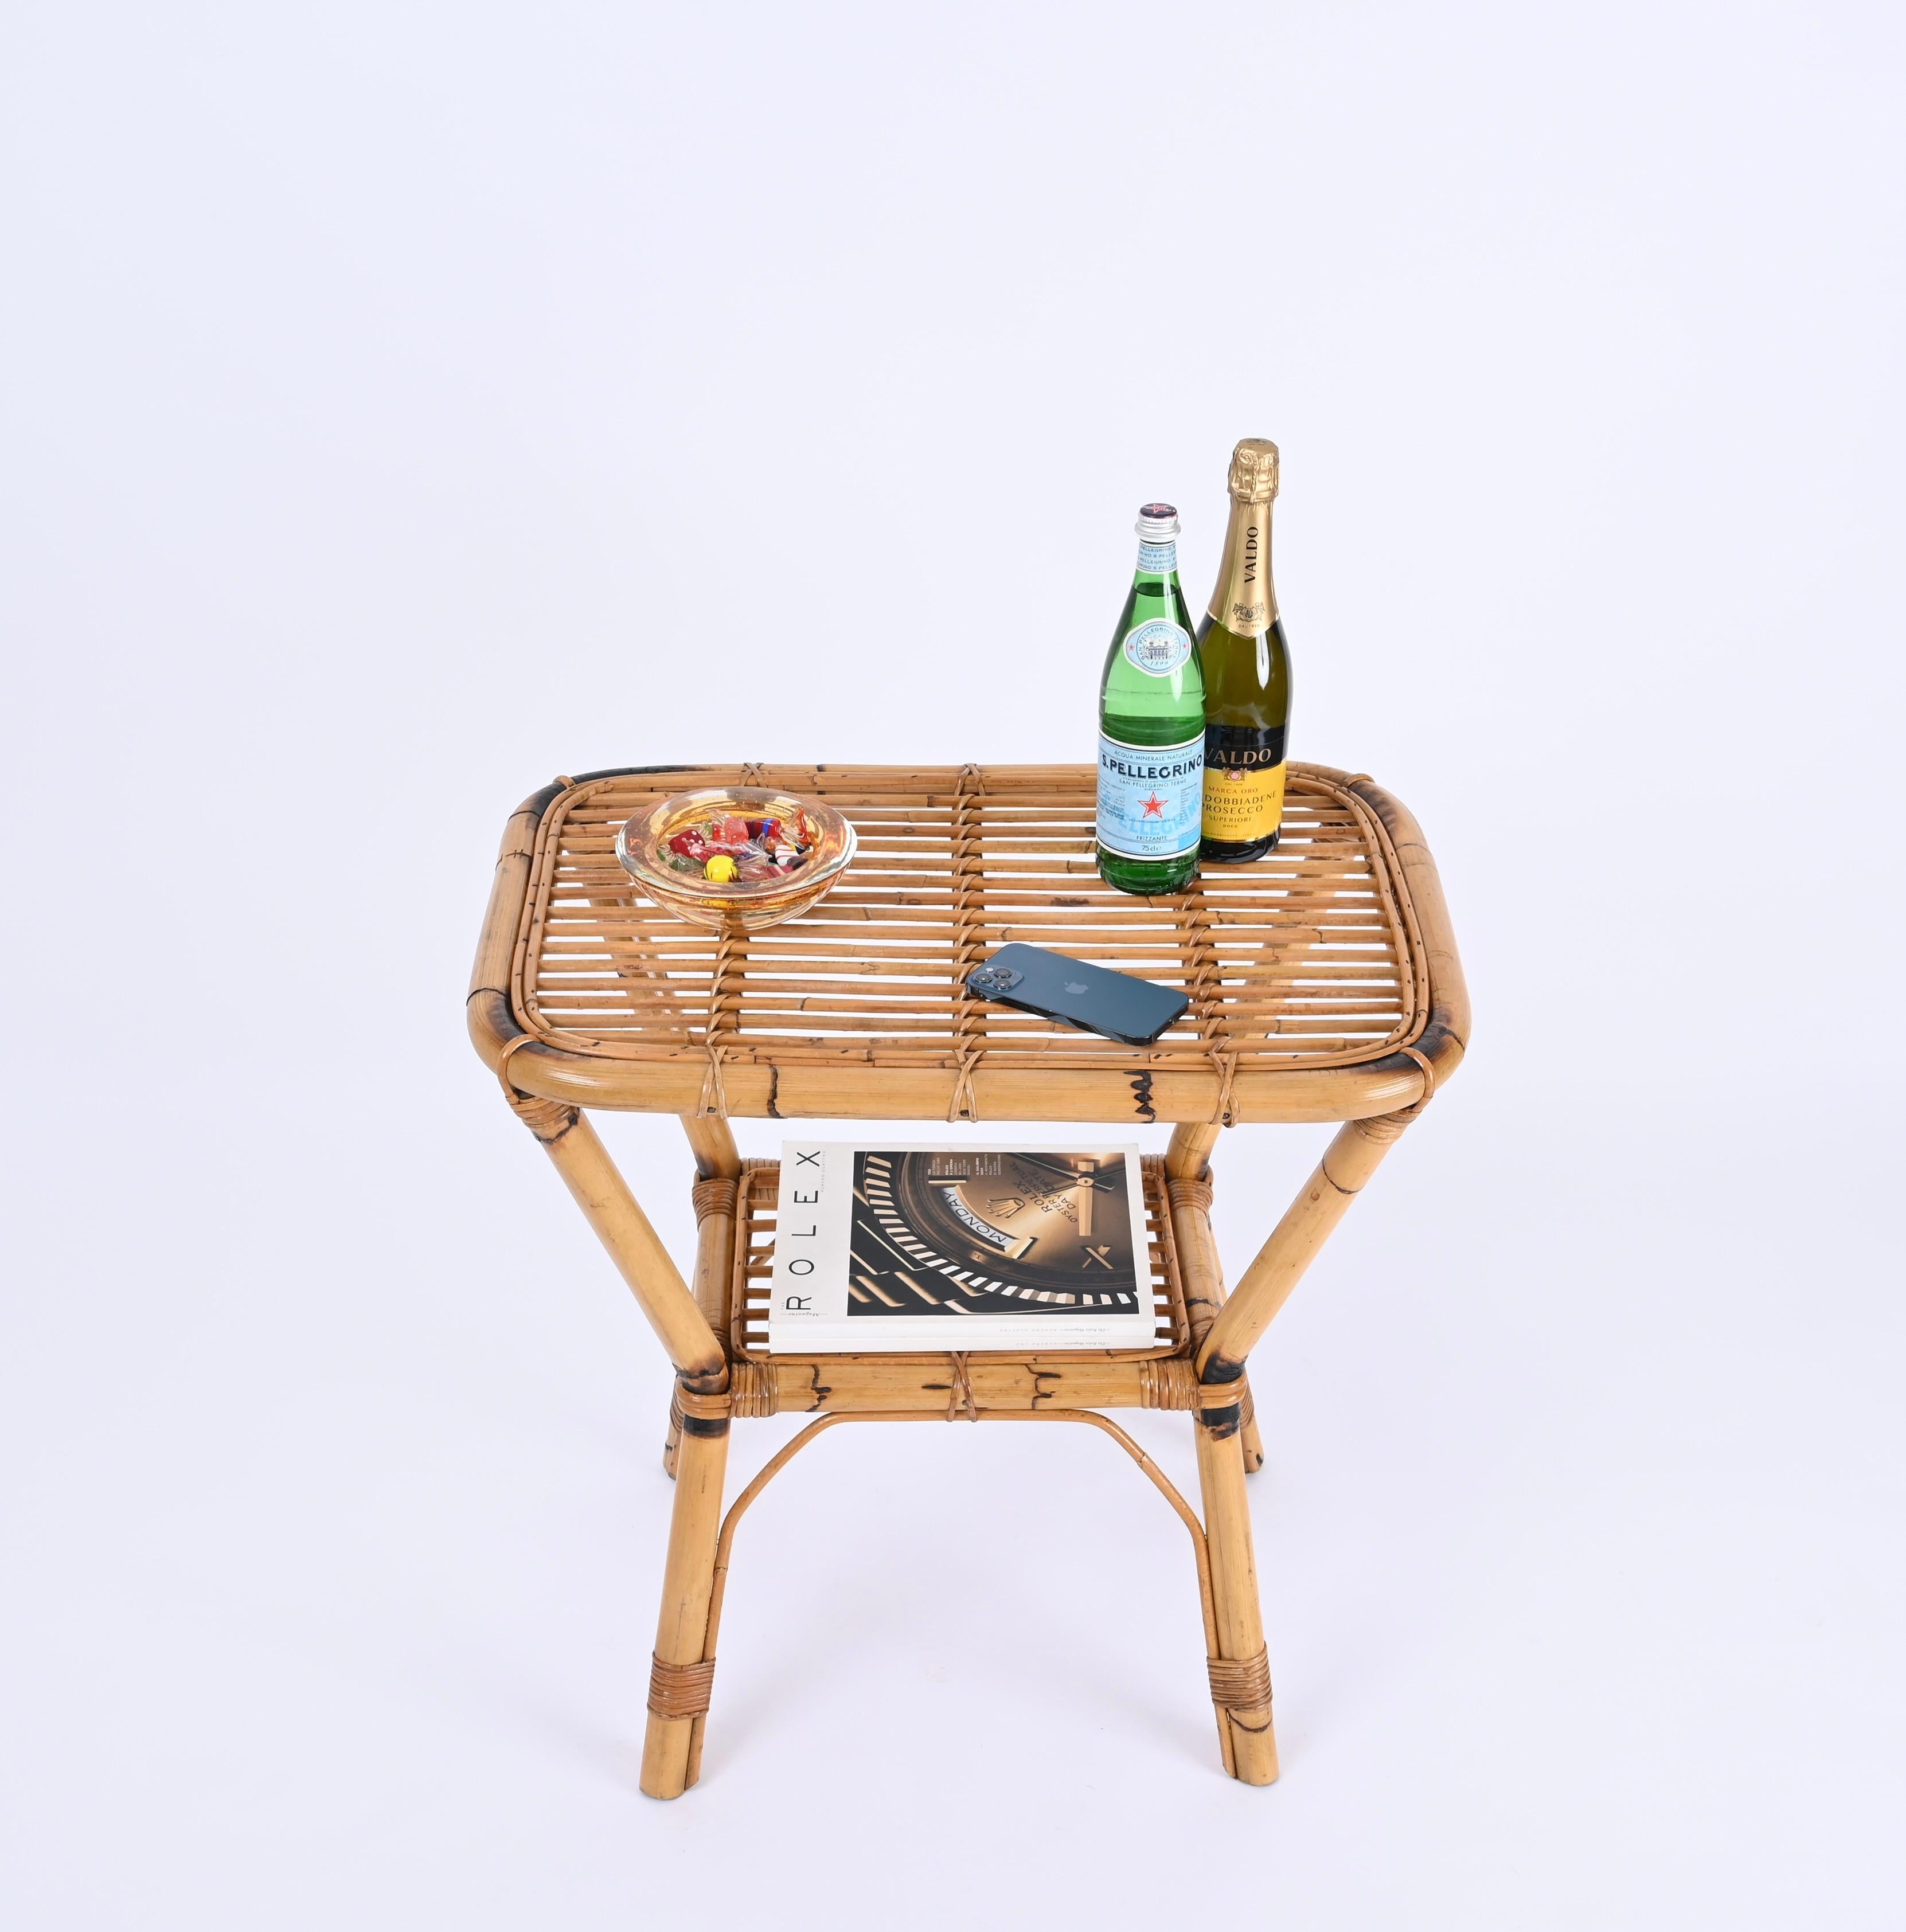 Stunning midcentury Italian coffee or side table in rattan, bamboo and wicker. This unique piece was produced in Italy during the 1960s.

This two-tier side table is fully hand-crafted with perfect proportions. The structure is made in sturdy curved